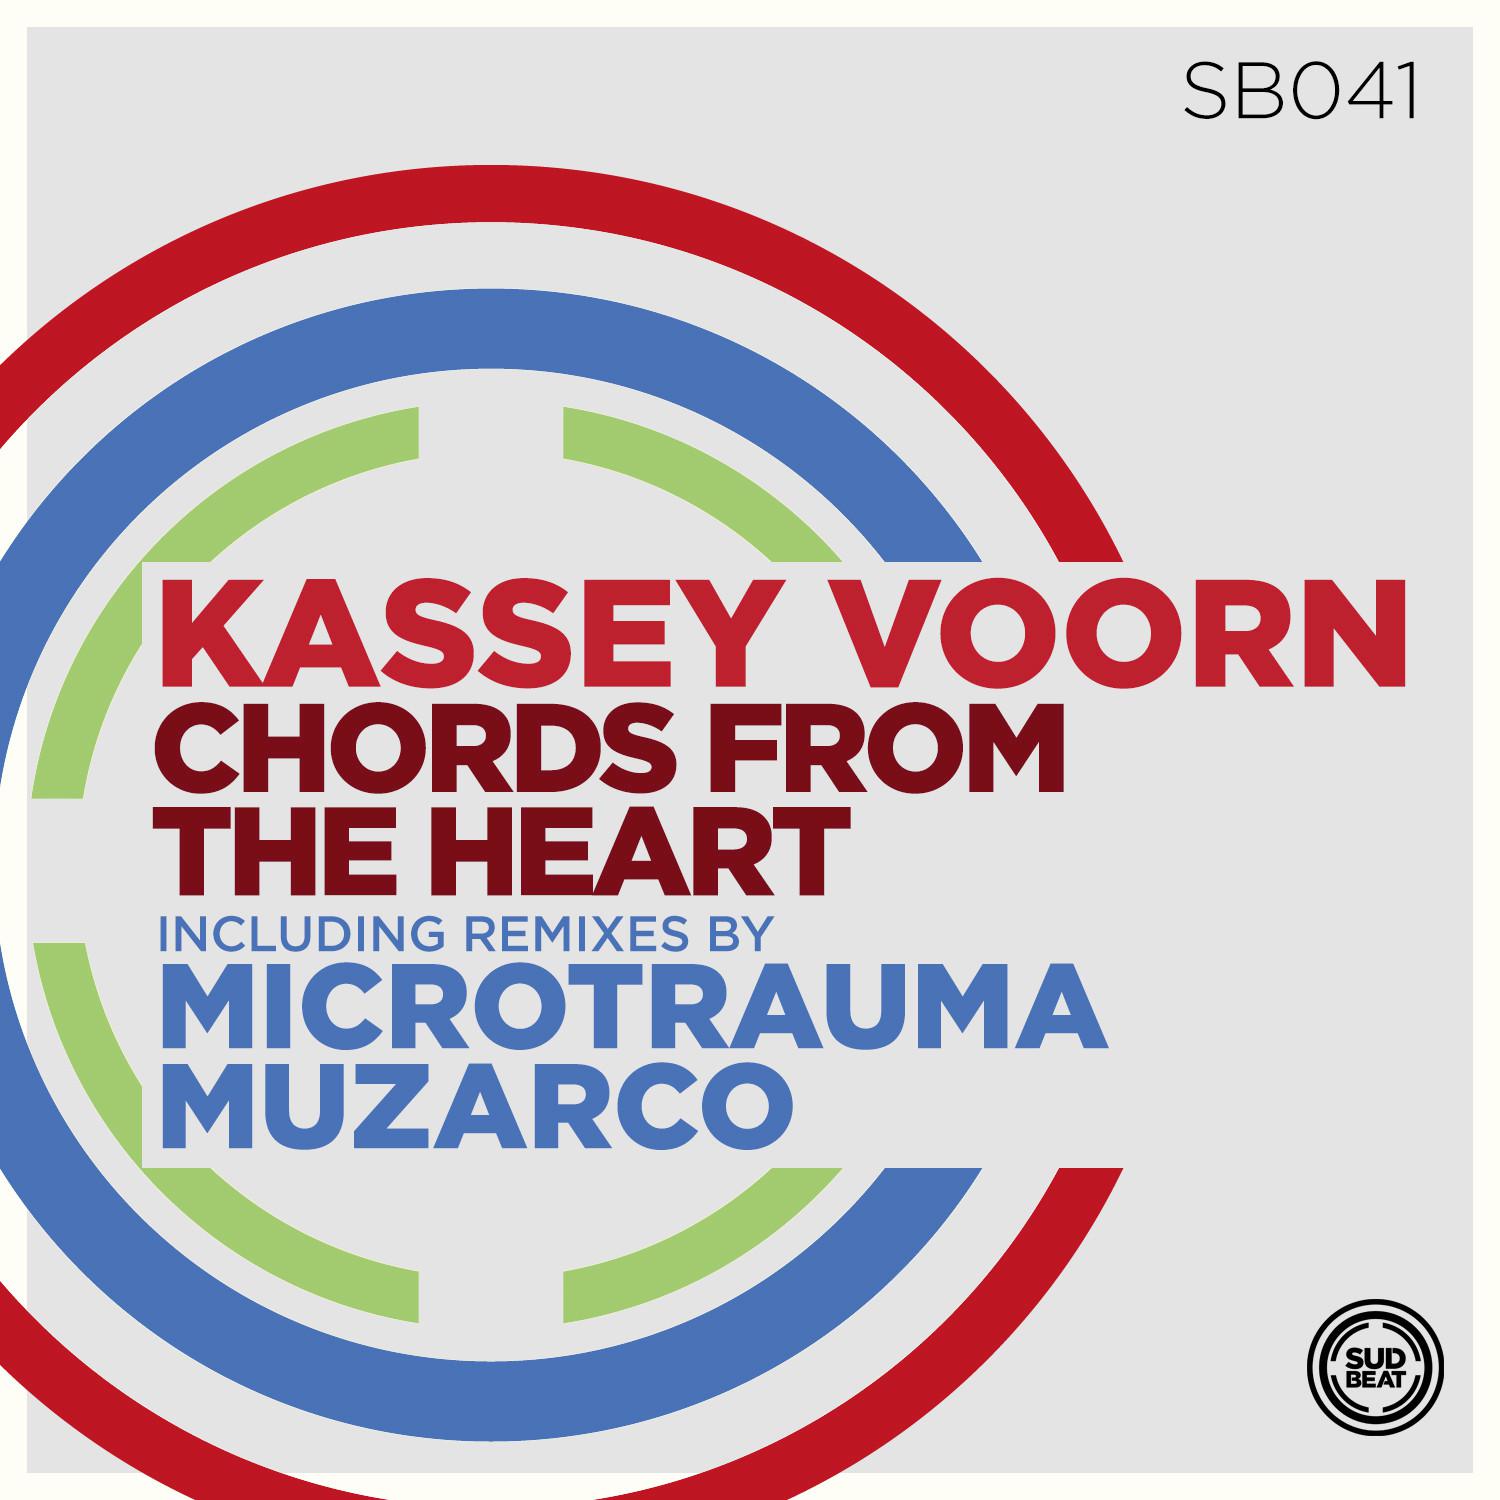 Kassey Voorn - Chords From the Heart (Muzarco Remix)